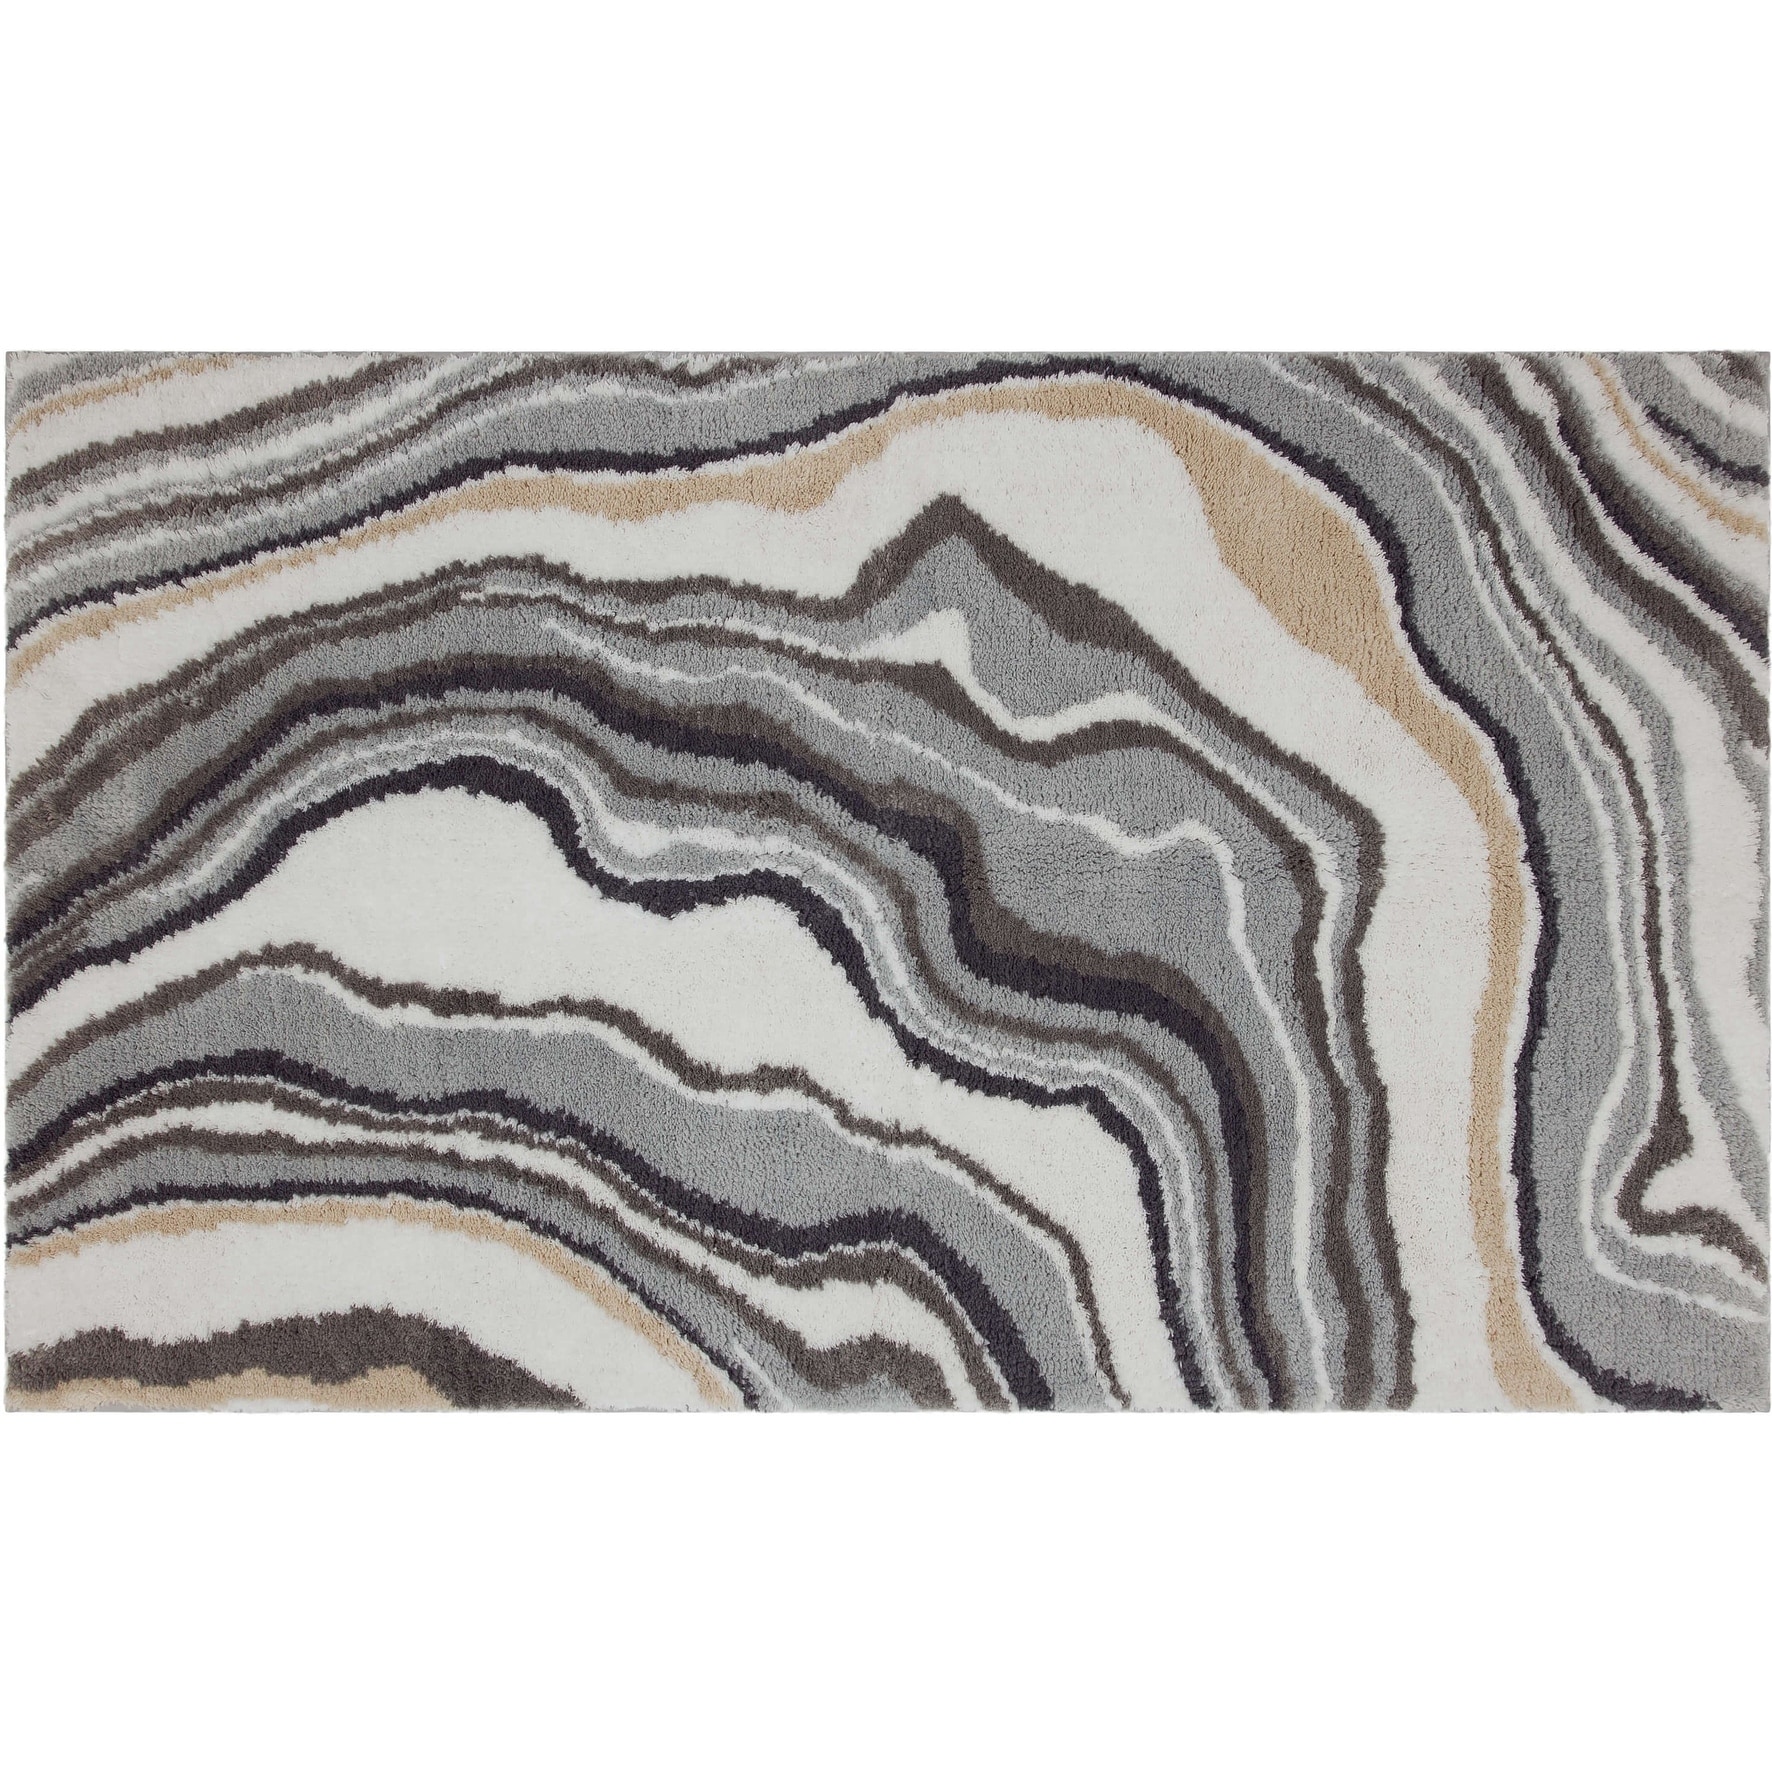 https://ak1.ostkcdn.com/images/products/is/images/direct/ed1f73fad0c273a197e93acae1c0bbc93cfc8c8b/Mohawk-Home-Serpentine-Bath-Rug.jpg